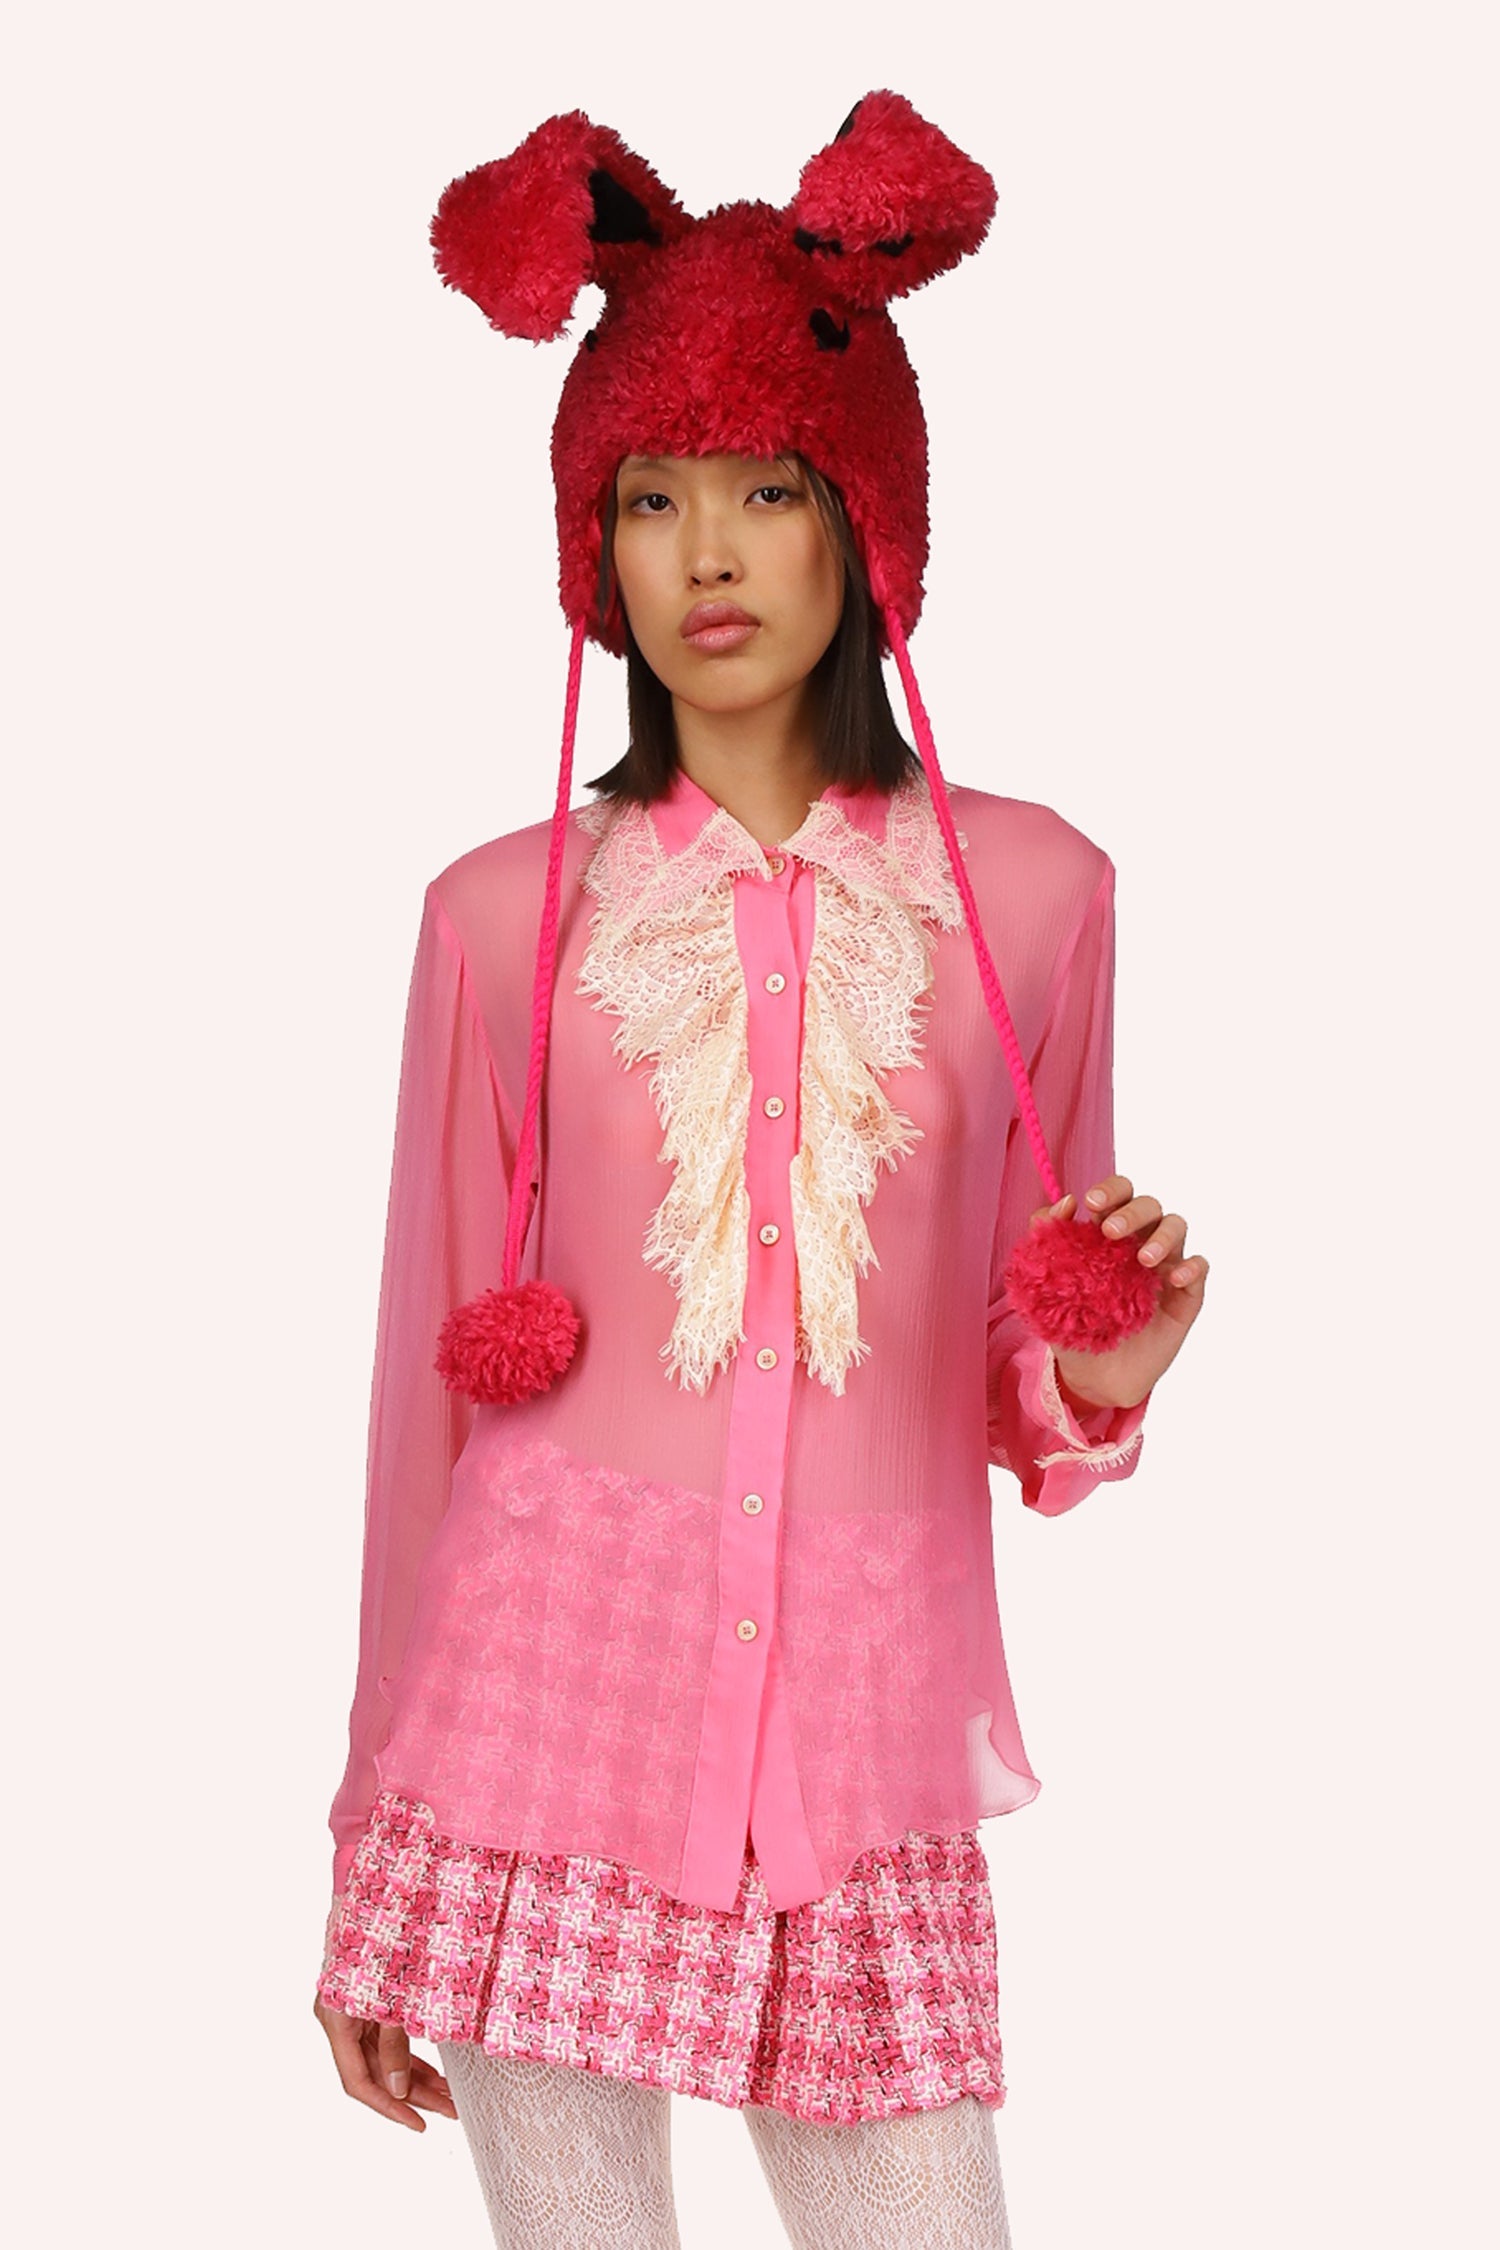 Lingerie Blouse, see-through rose-colored, long sleeves, distinctive chiffon Ruffle collar, 7 white buttons, V-cut on hips 